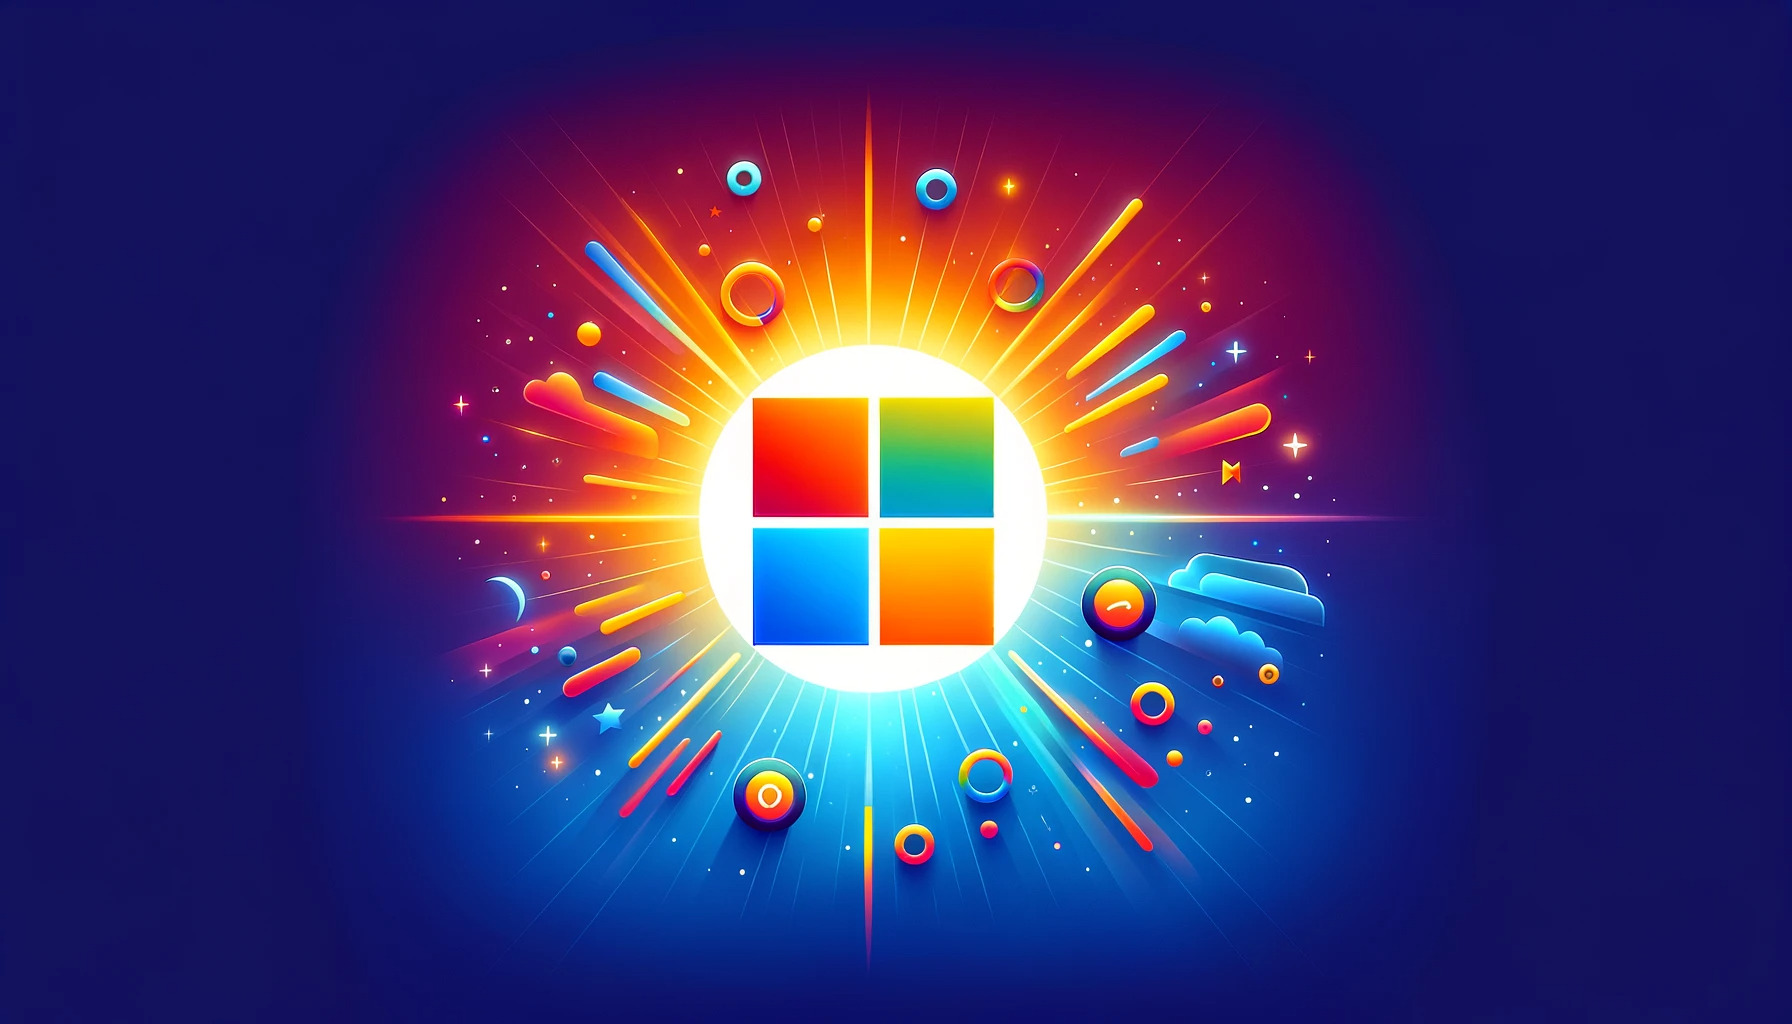 Microsoft Logo with bright explosion of colour and icons